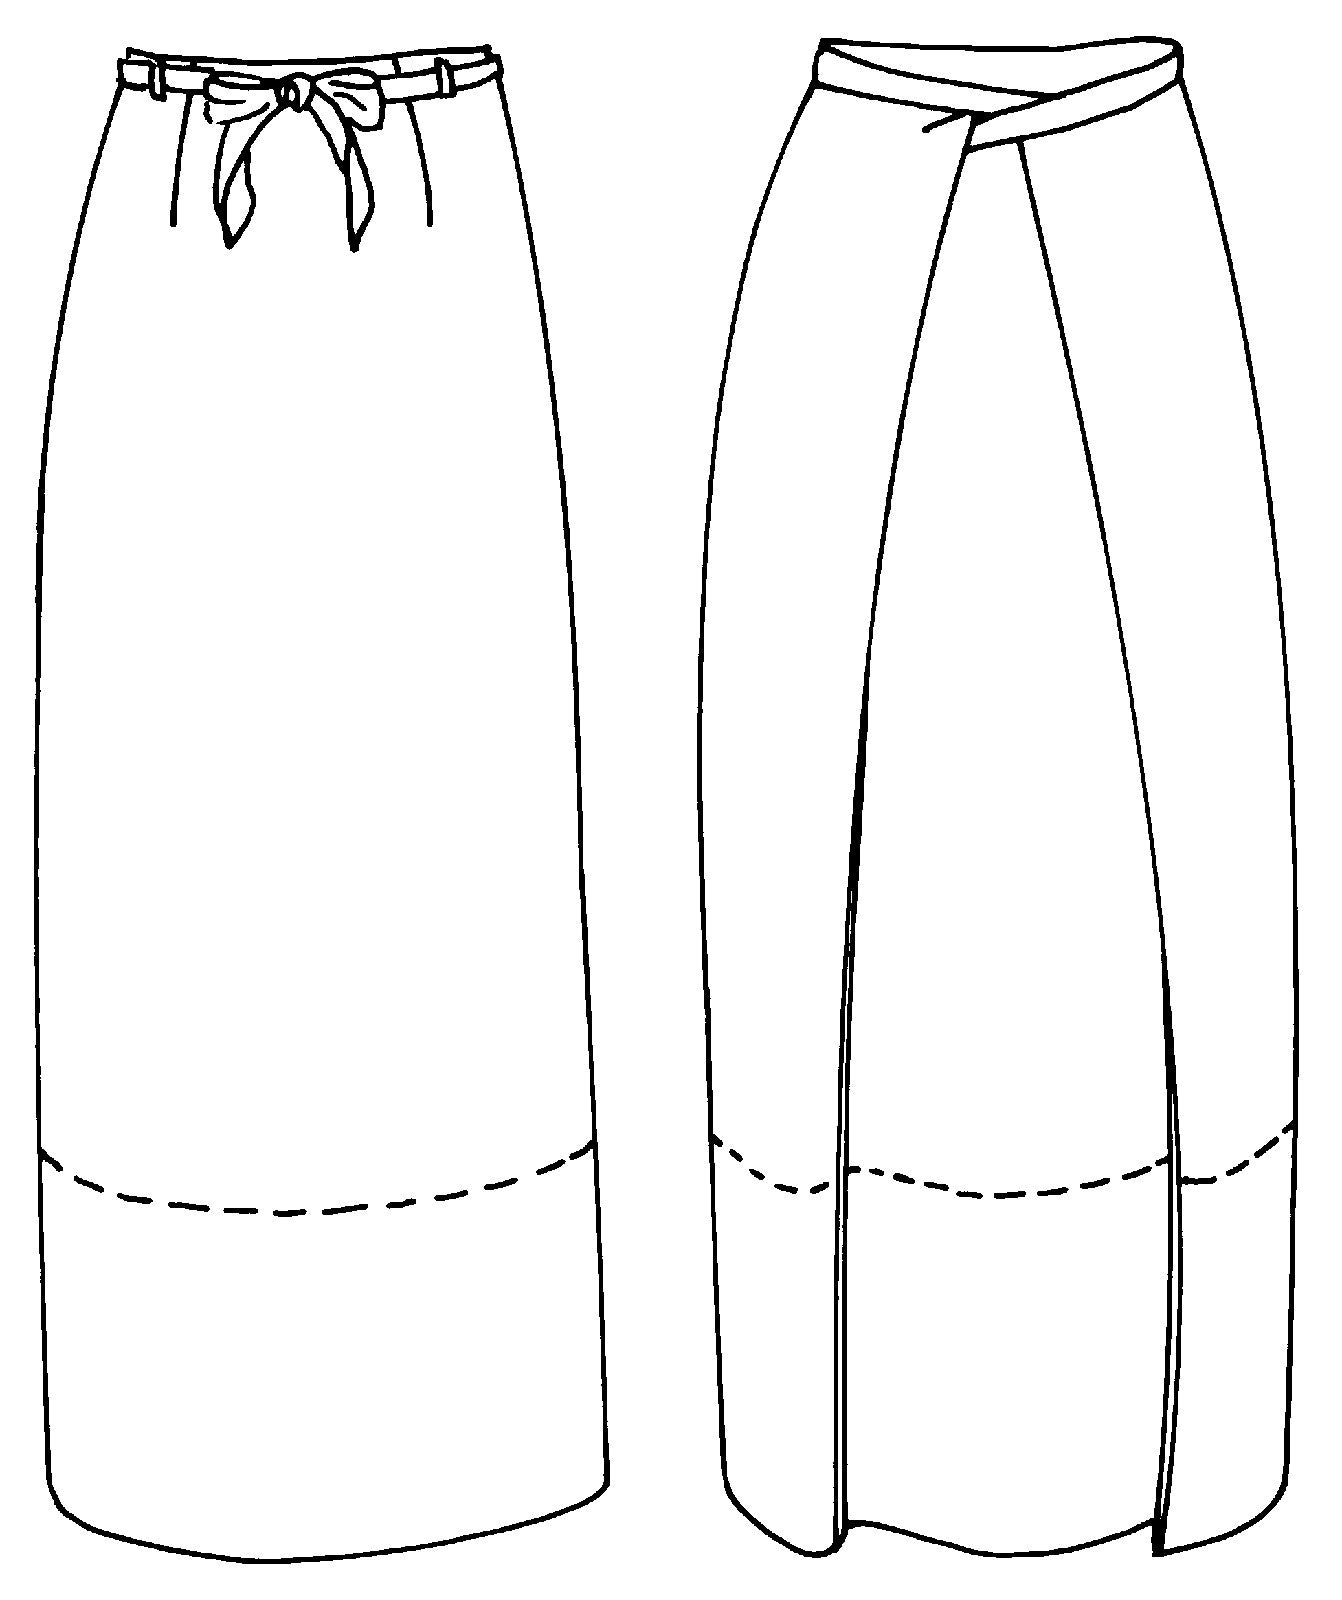 Flat line drawing of front and back views of Chupa inspired skirt.